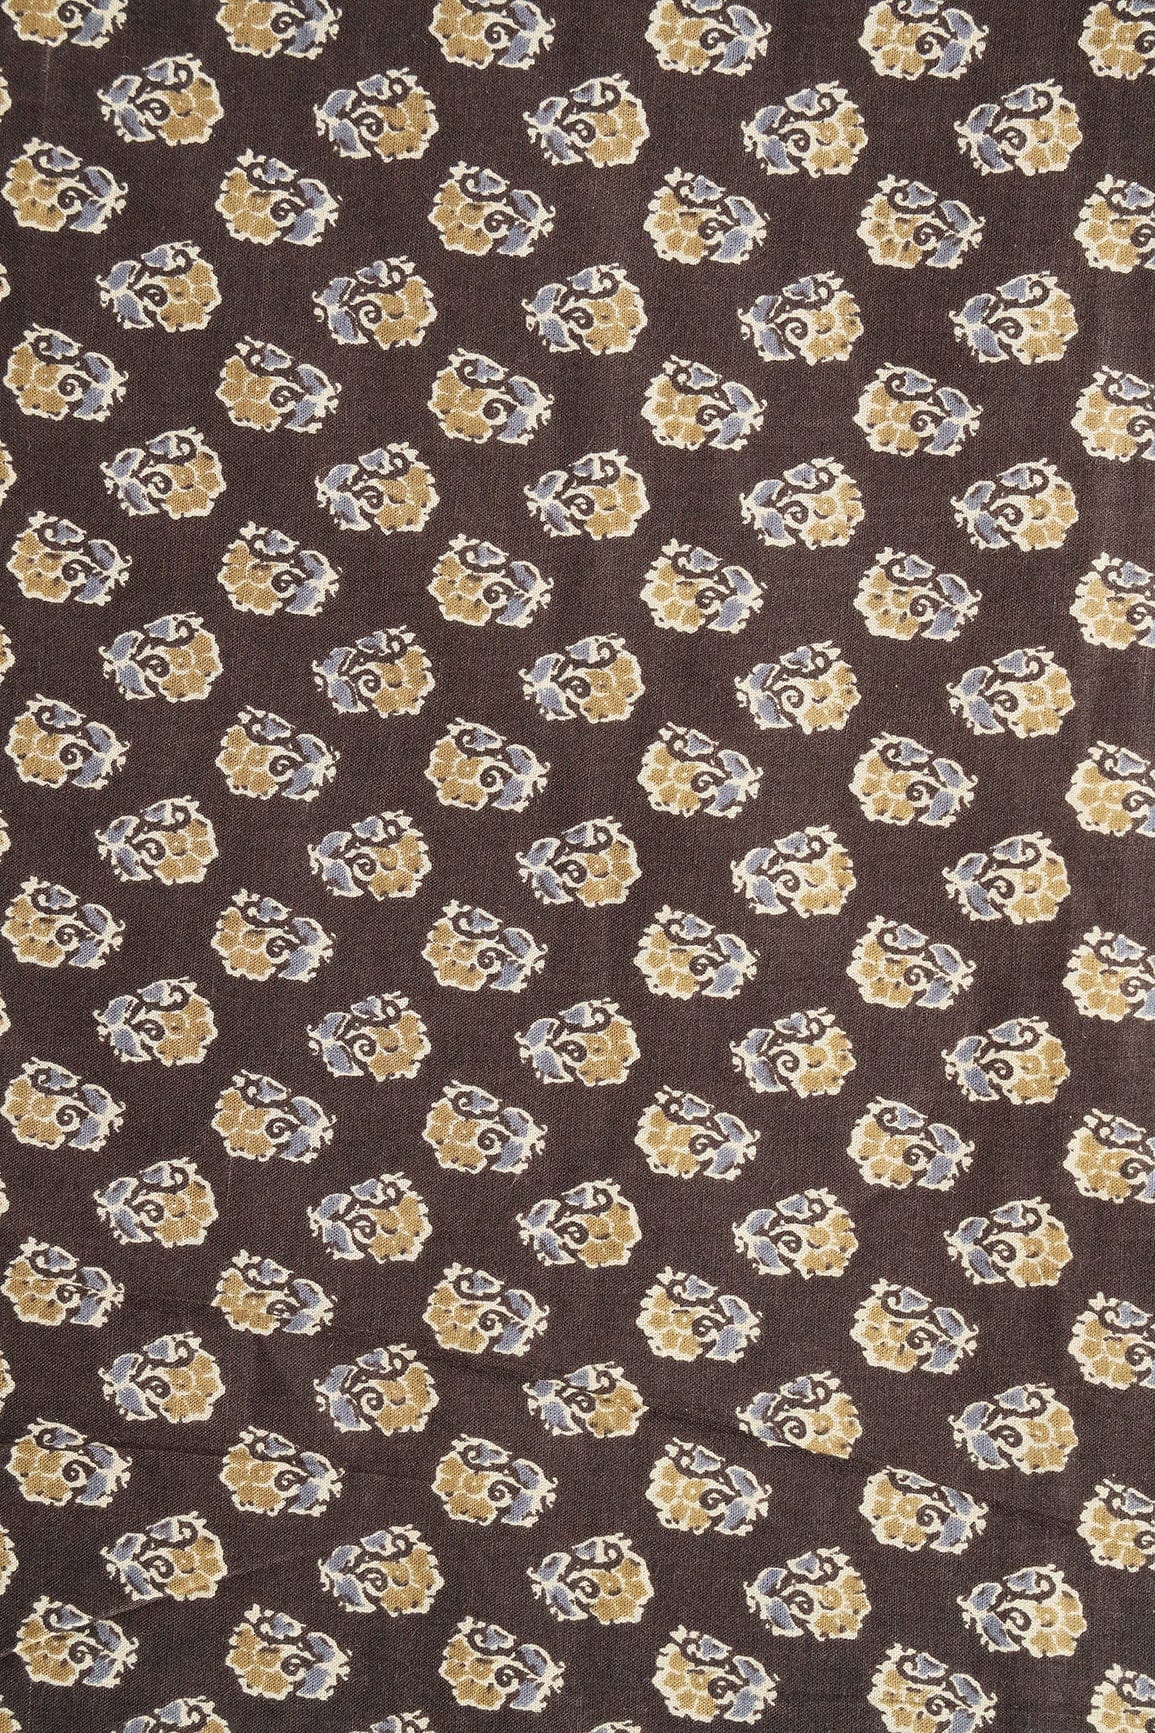 doeraa Prints Dark Brown And Olive Floral Print On Pure Mul Cotton Fabric